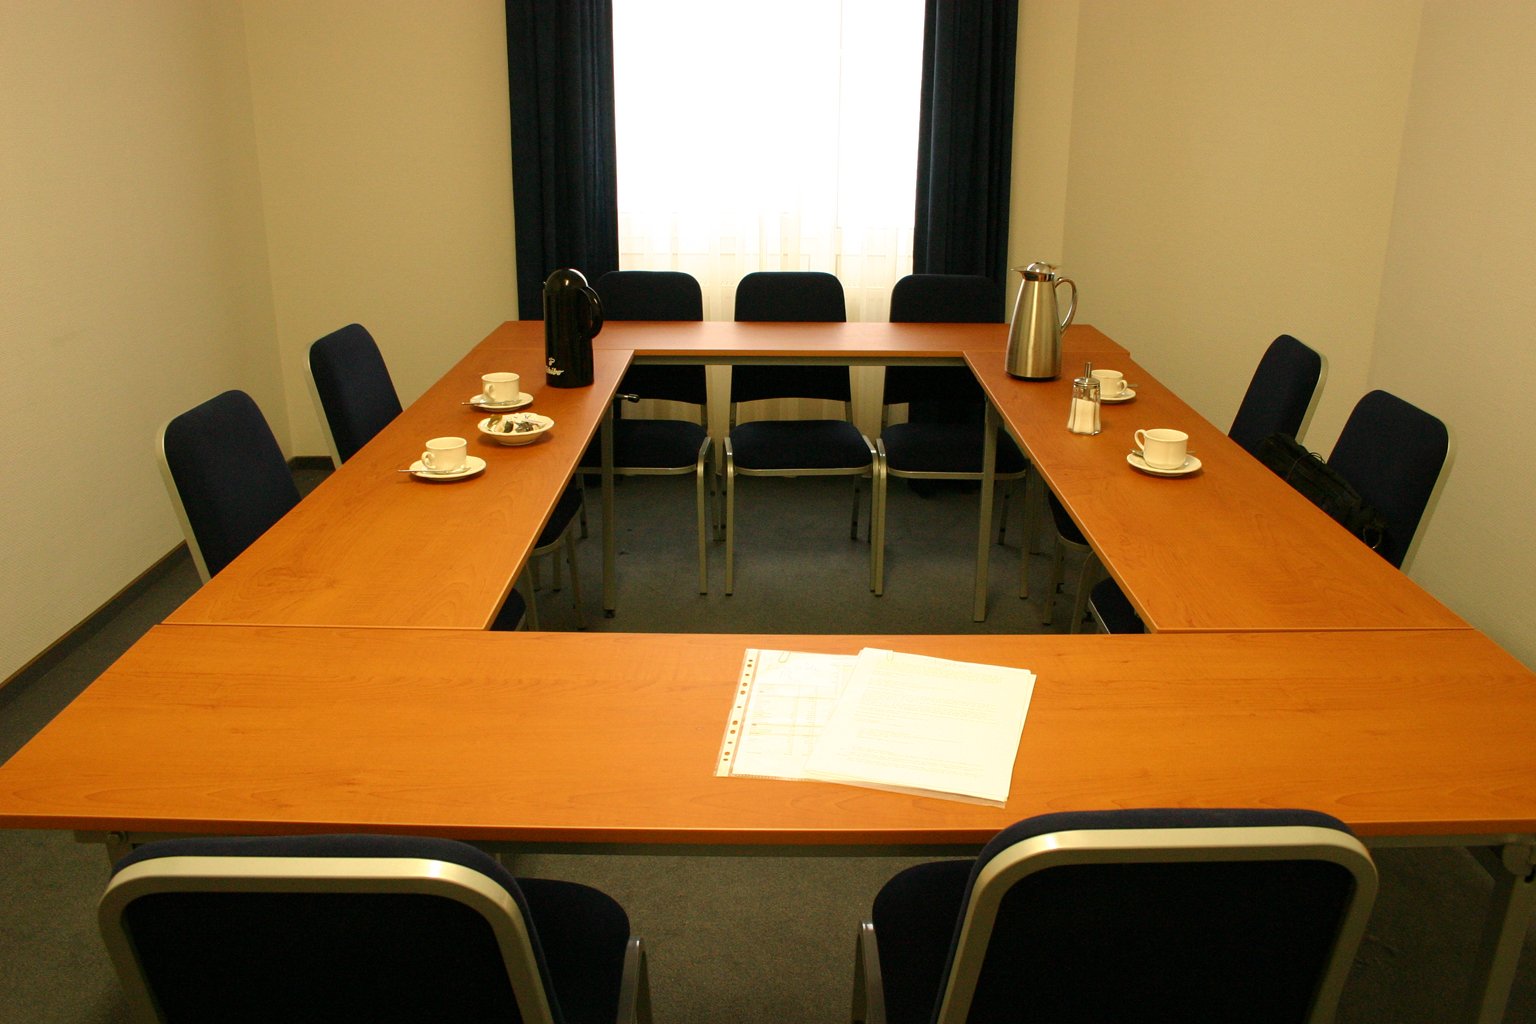 a room set up with multiple conference table and chairs